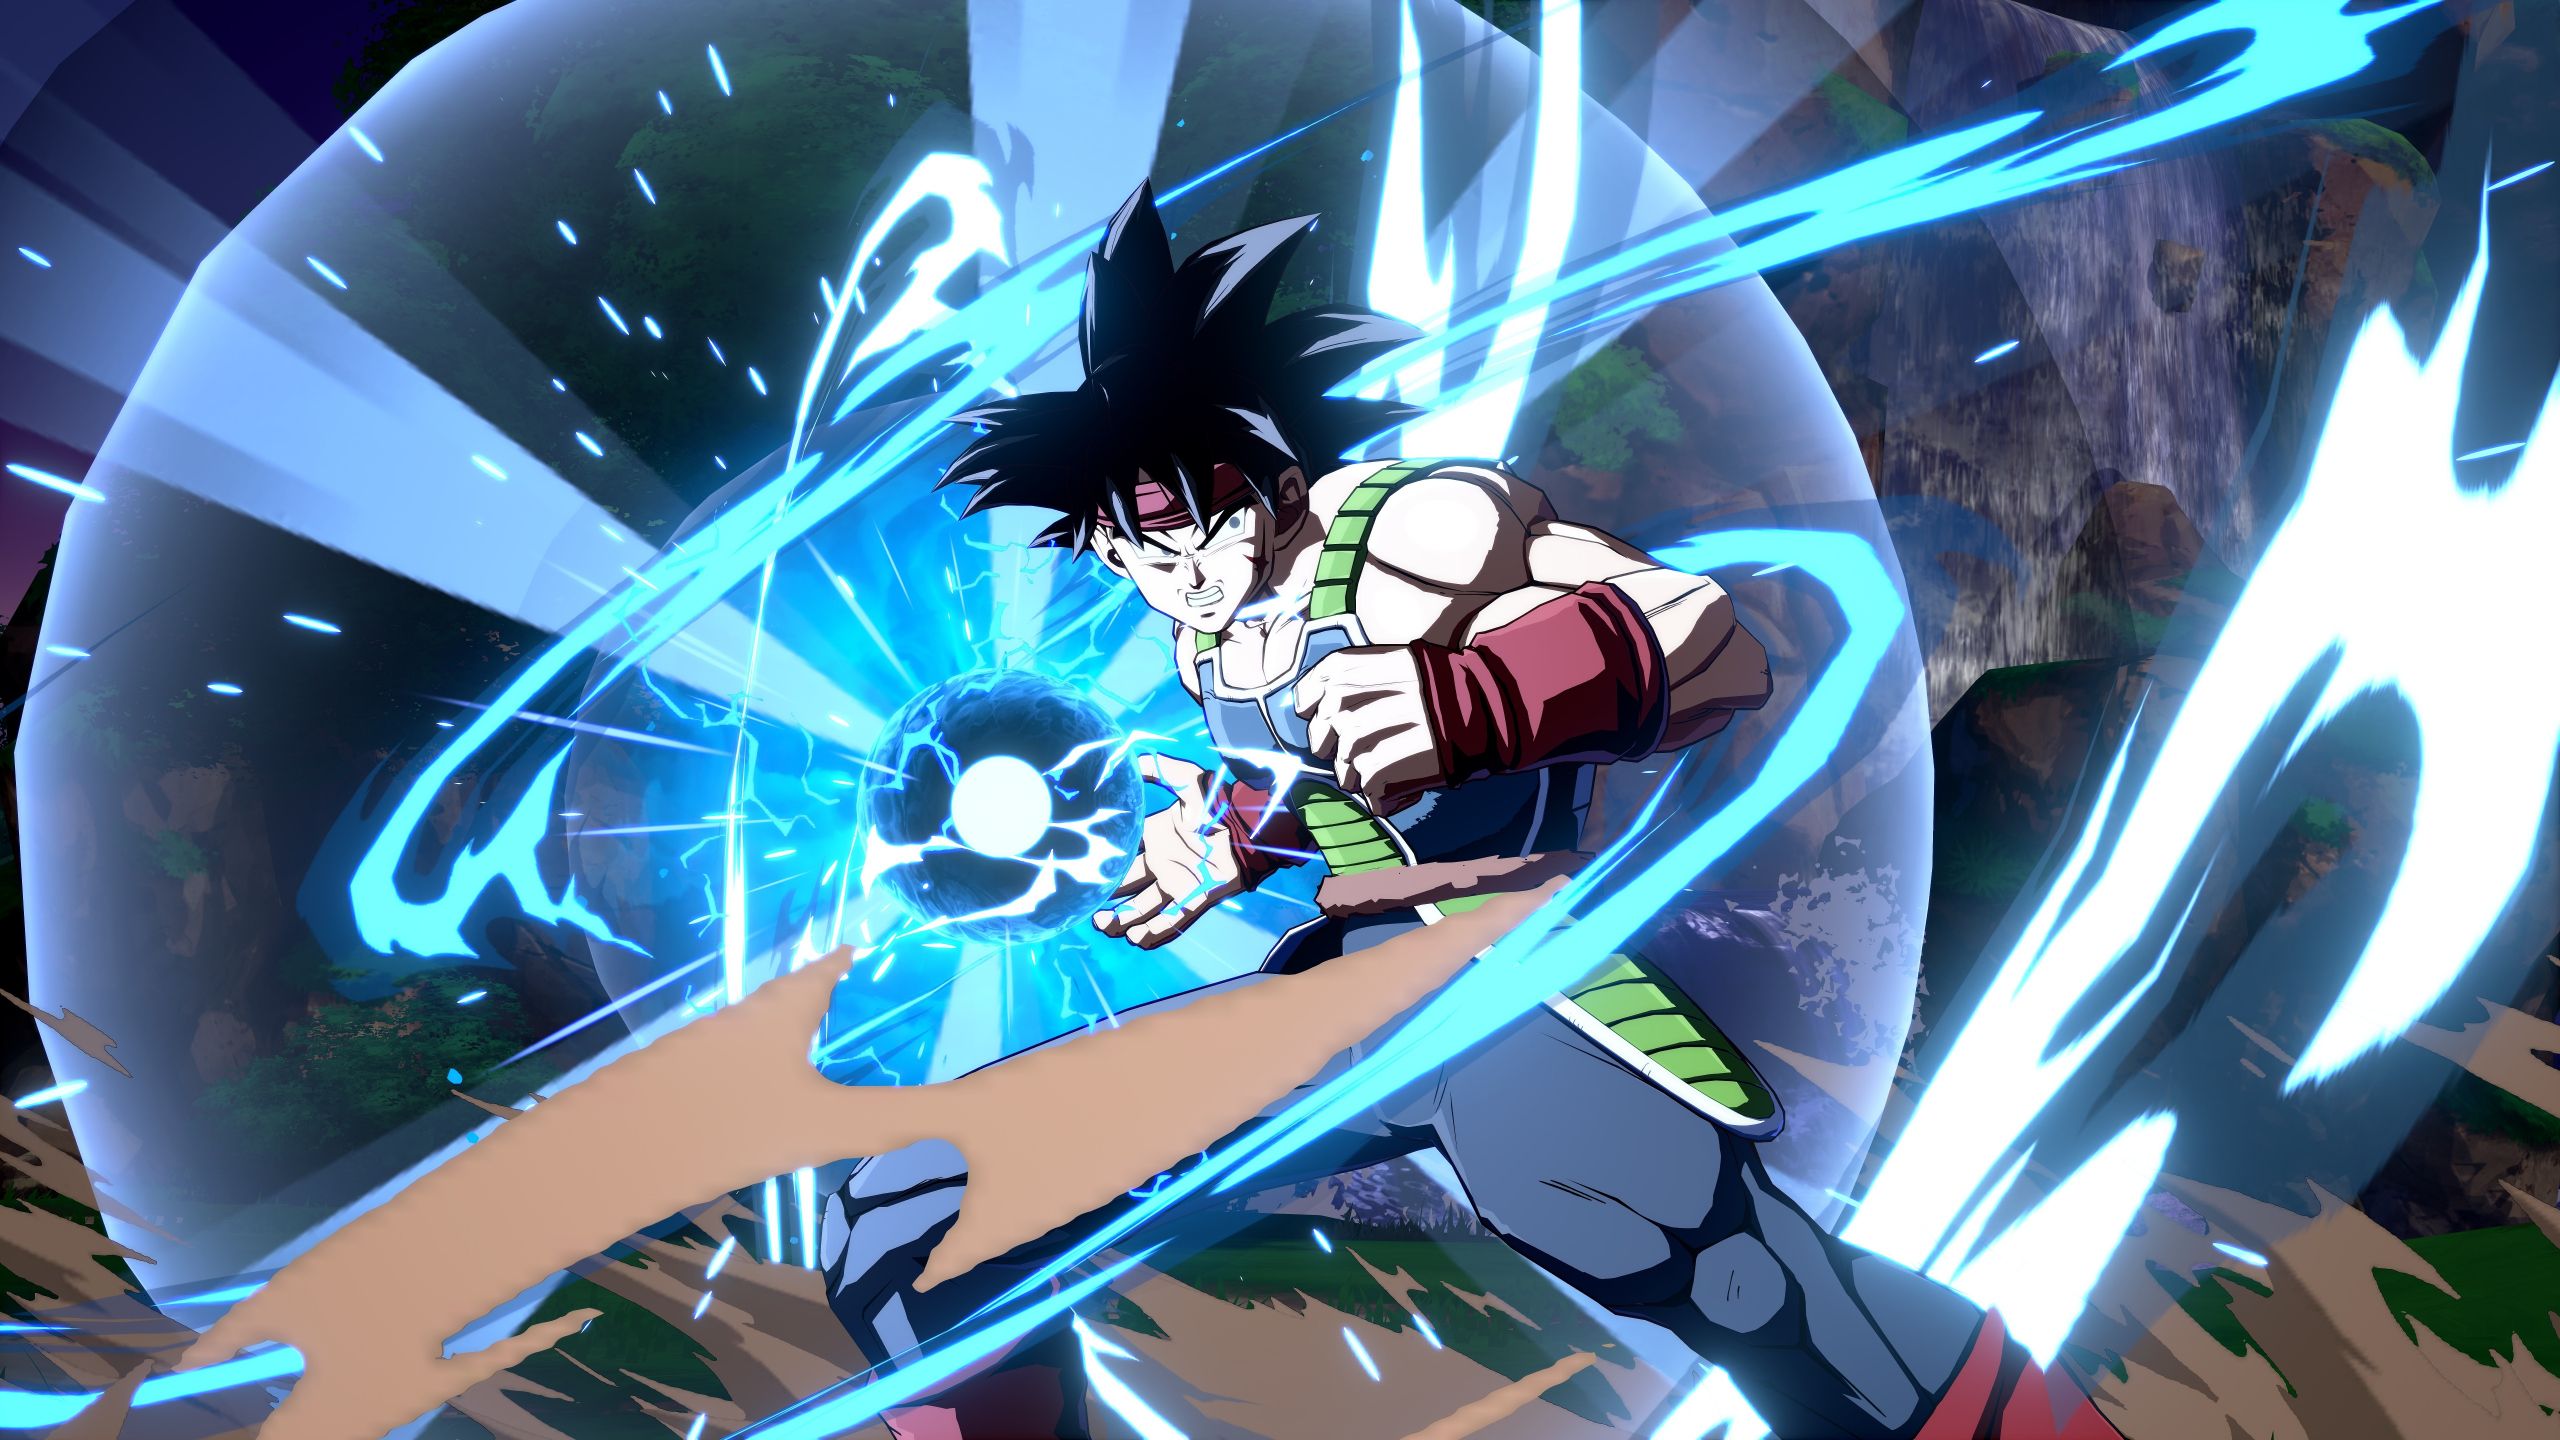 Download 2560x1440 wallpapers dragon ball fighterz, bardock, video.